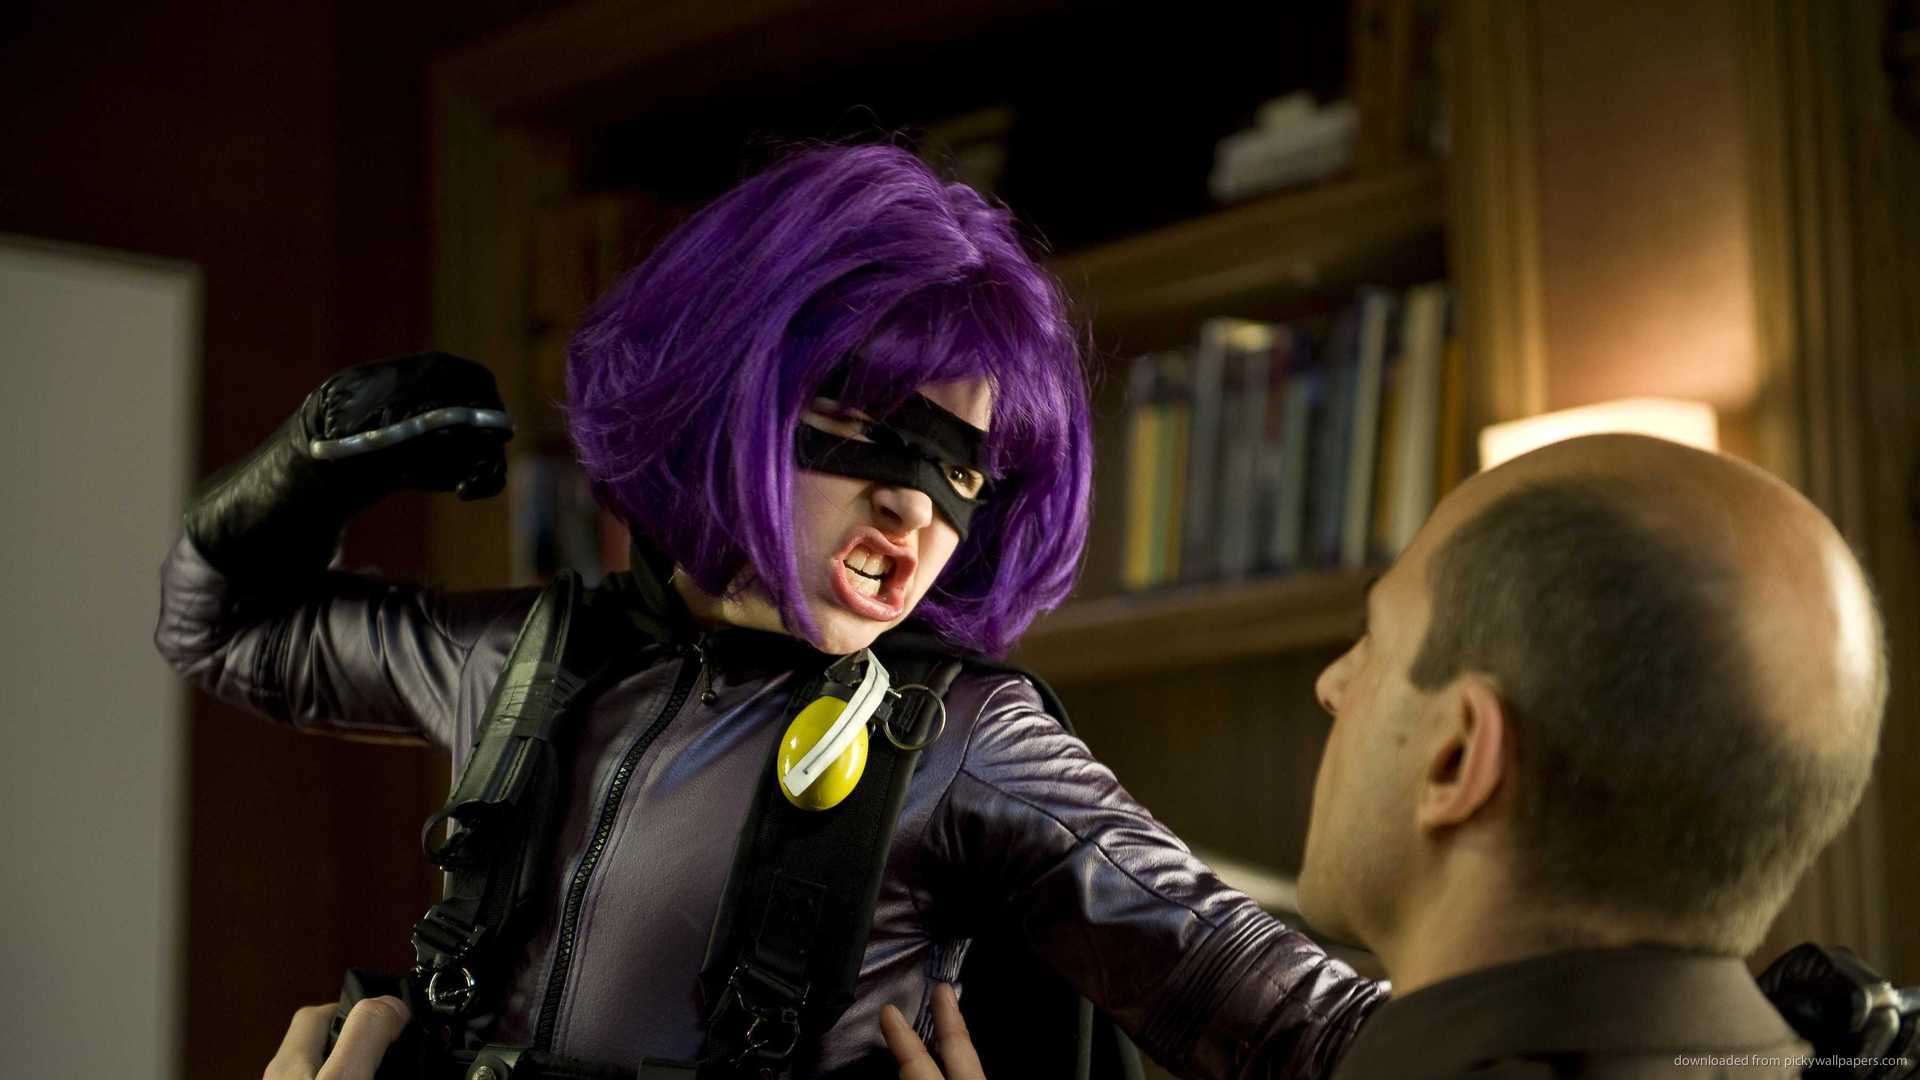 Awesome Hit Girl Wallpaper Widescreen